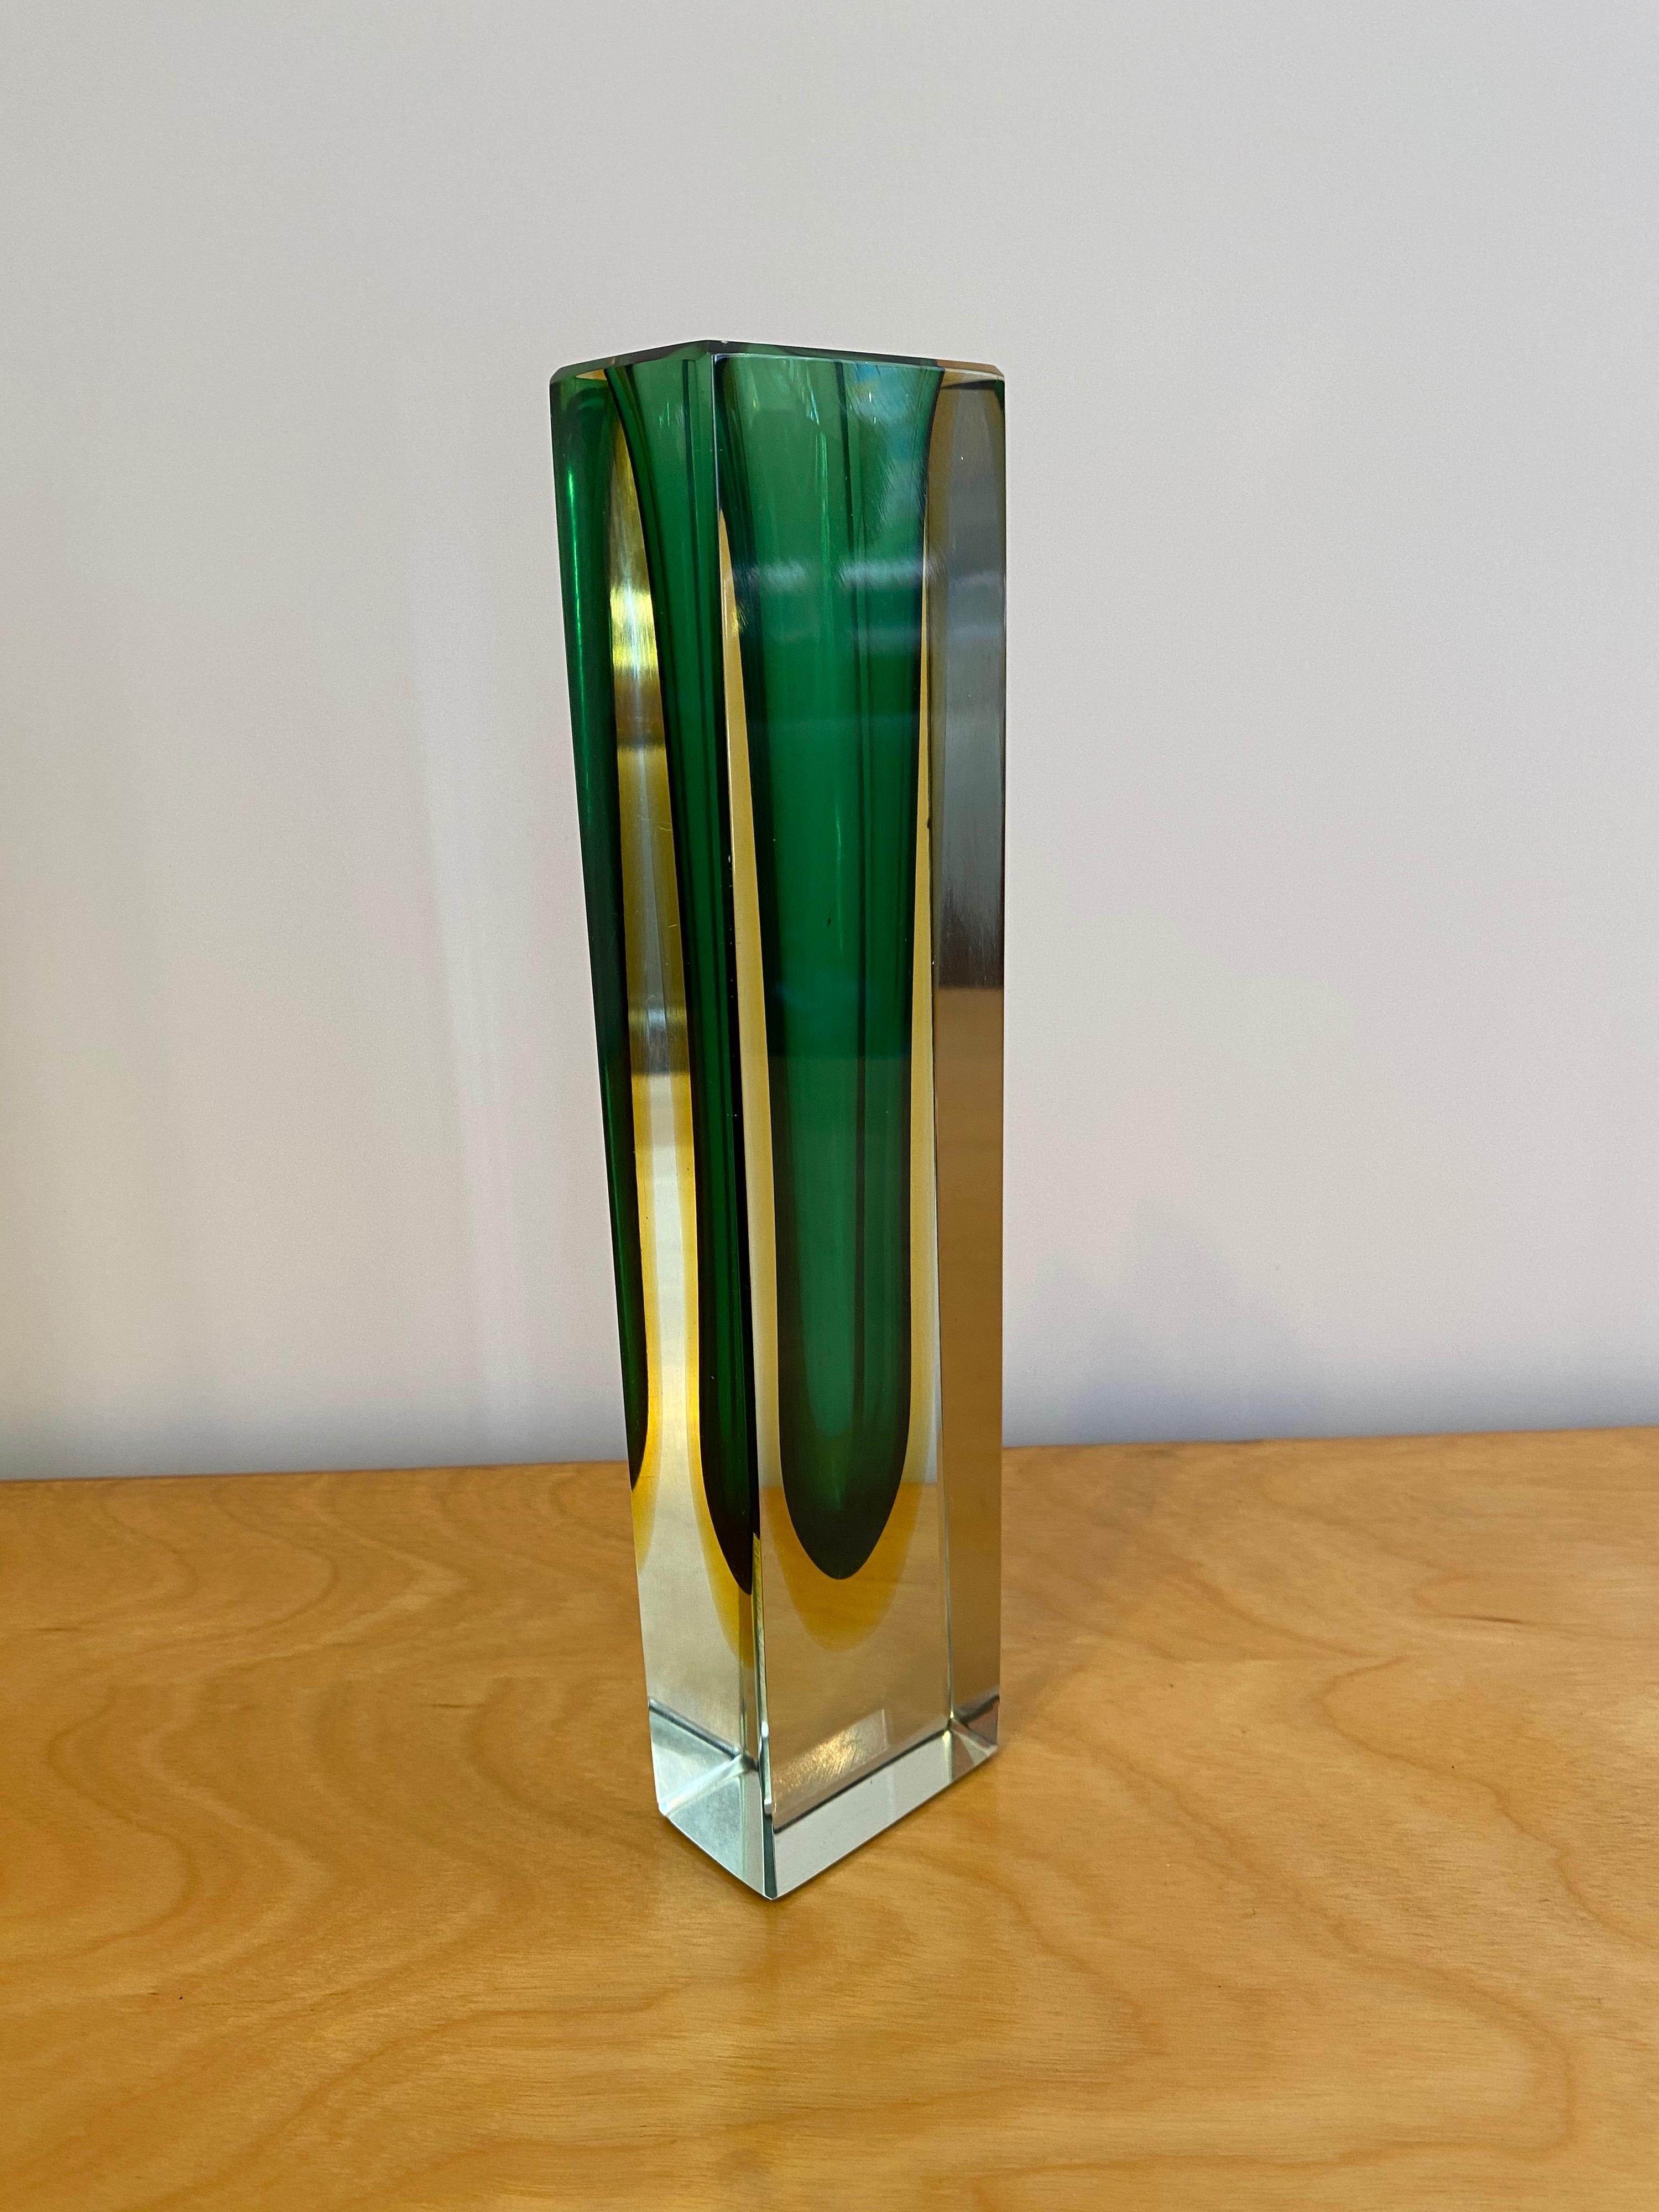 Murano glass Sommerso cut and polished tall rectangular vase. Often attributed to Mandruzzato. Beautiful yellow and green layered inner design.